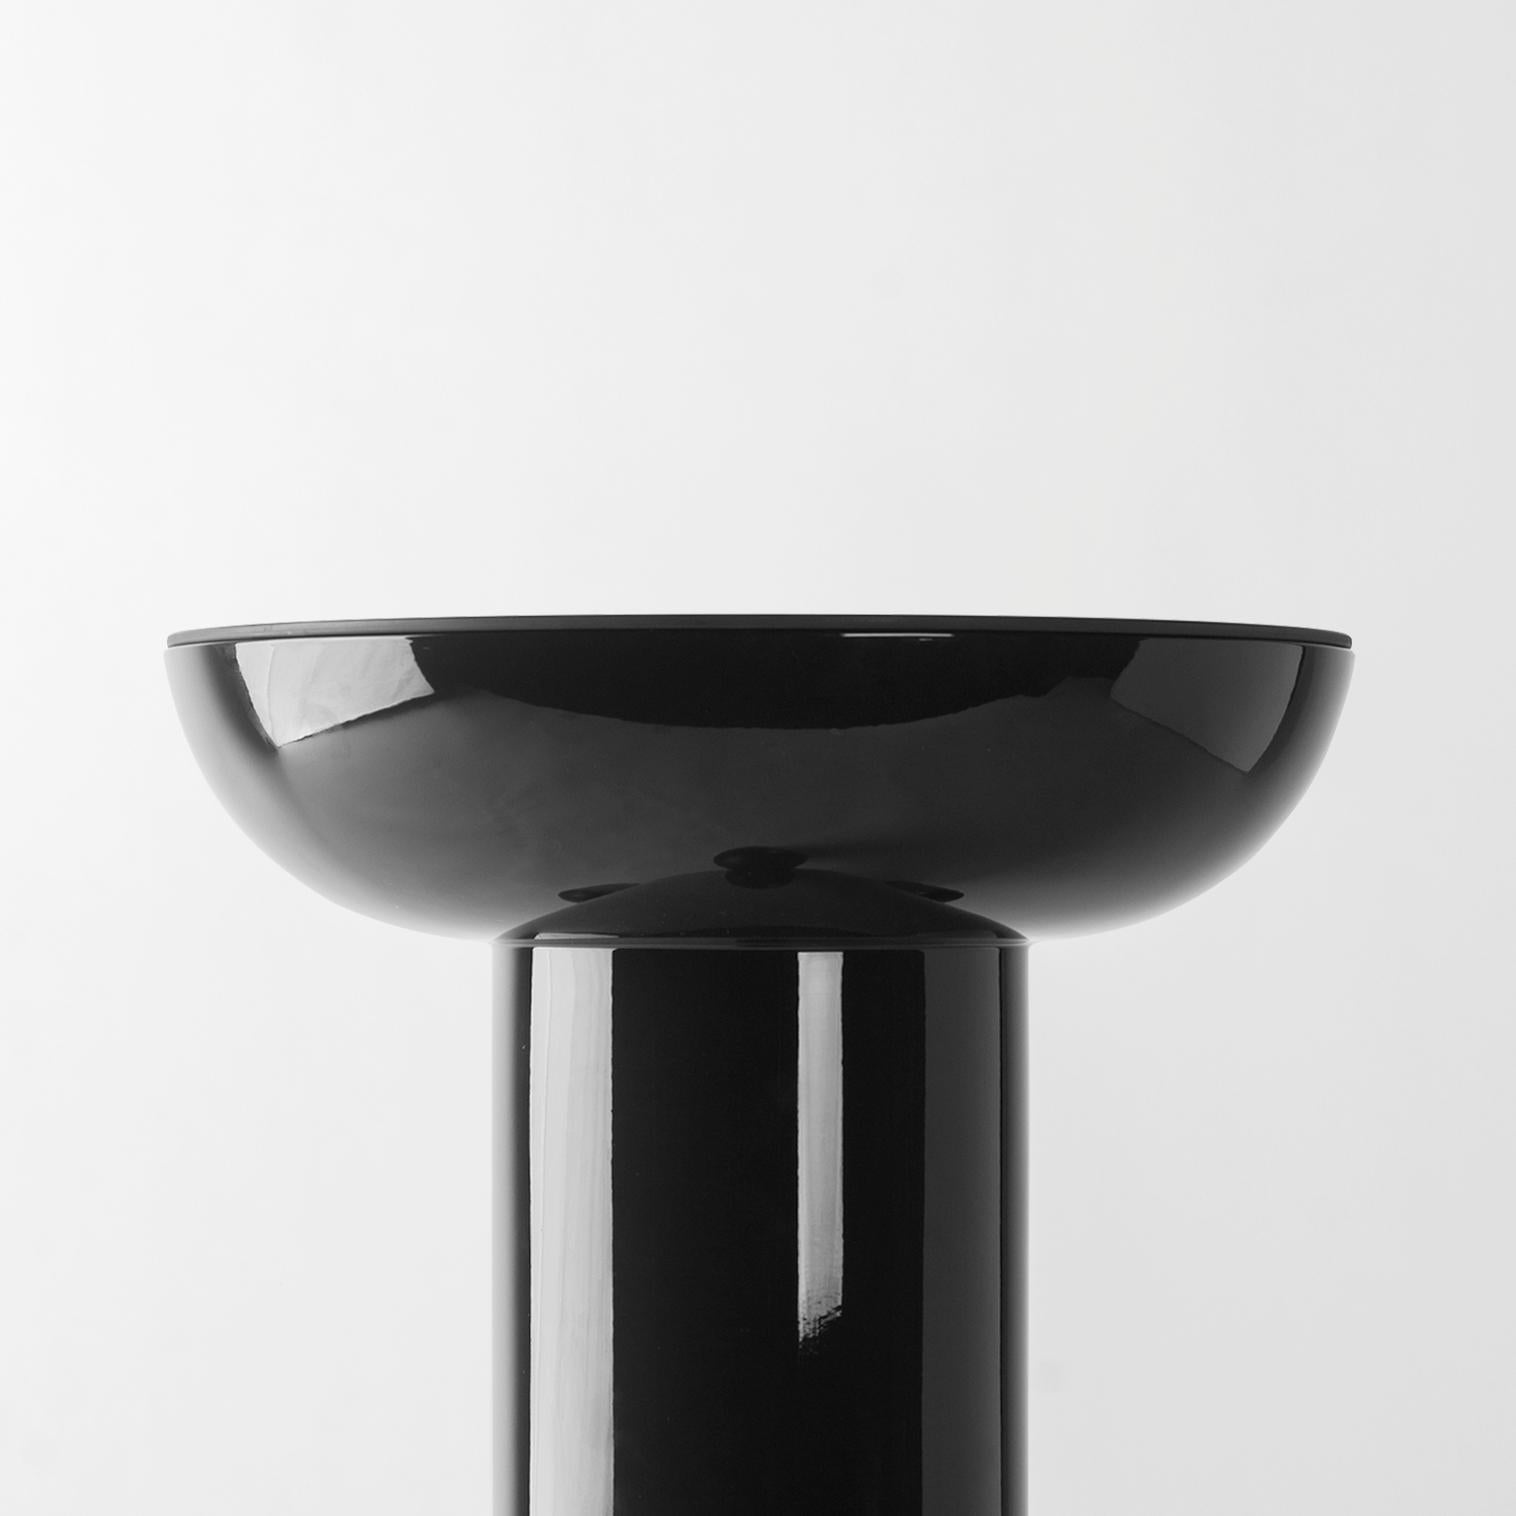 Dark Grey Explorer #03 table

Design by Jaime Hayon, 2019
Manufactured by BD Barcelona.

Laquered fibreglass body. Solid turned wooden legs and lacquered. Painted glass table top.

Measures: 40 Ø x 50 cm

- Glass: RAL 7021
- Body: RAL 7021